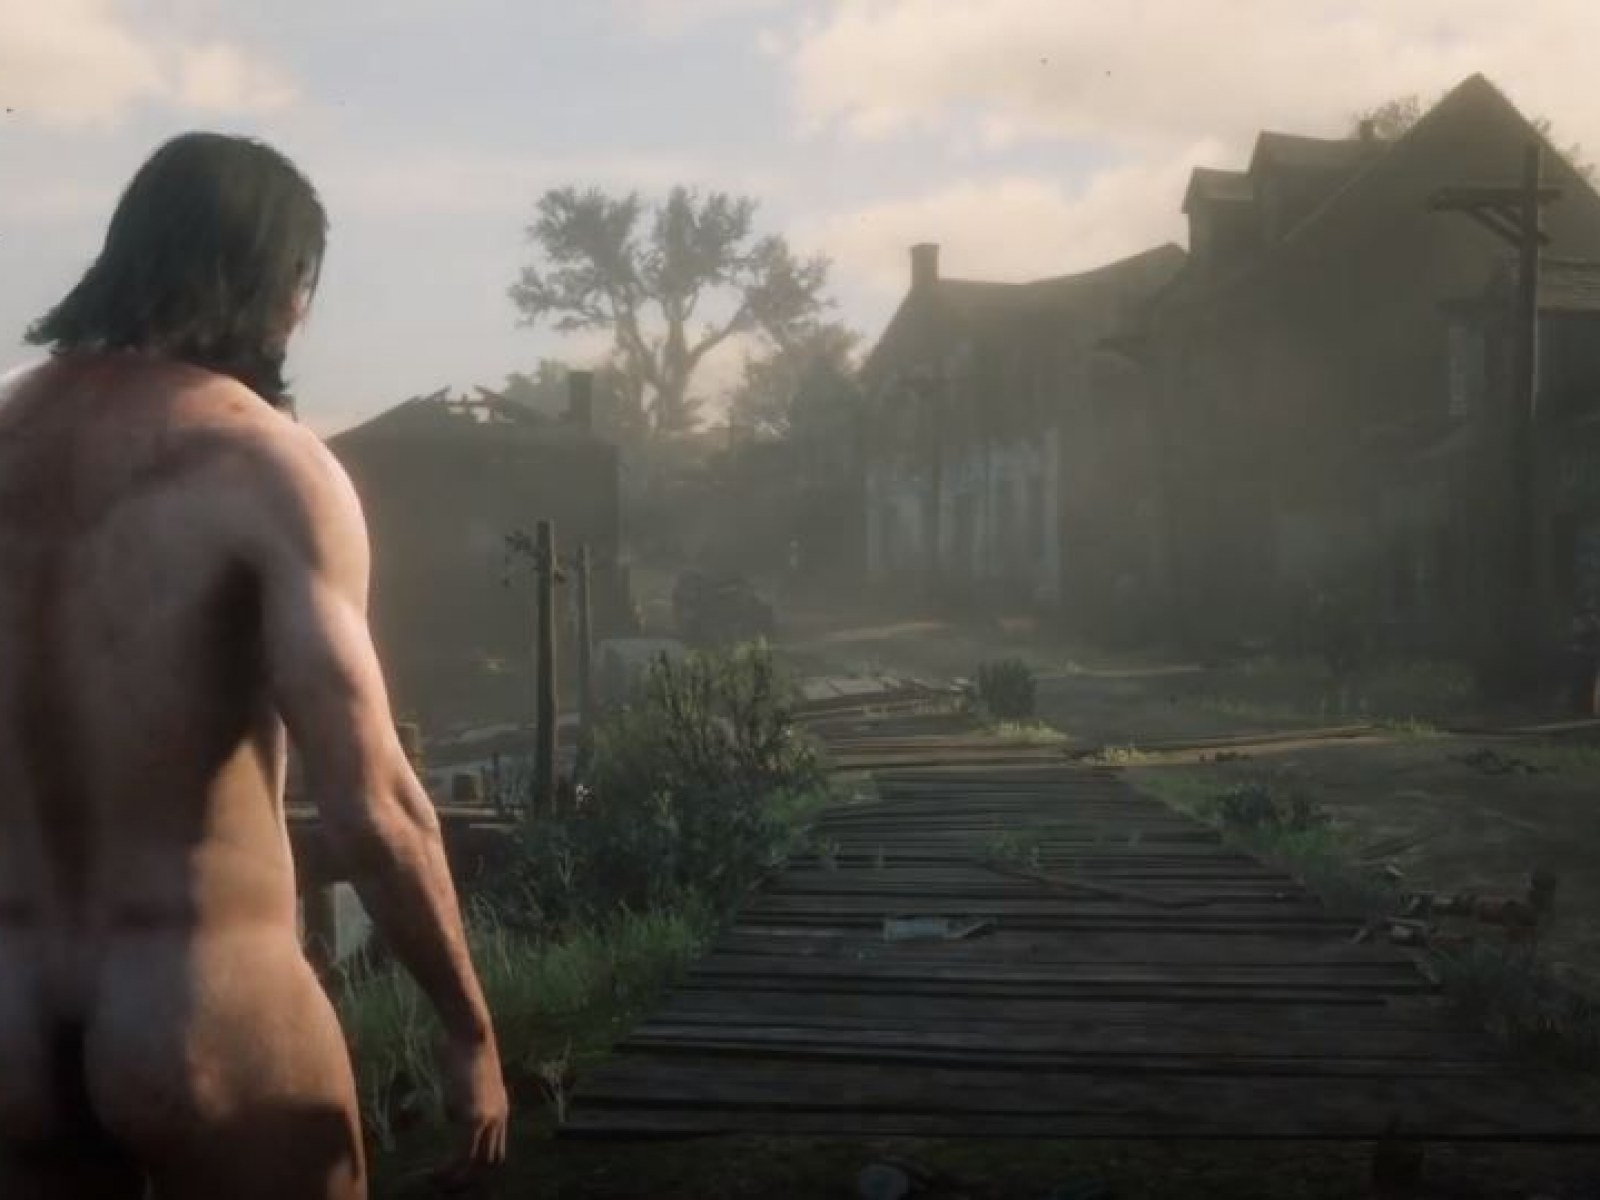 red dead redemption 2 nude mod - goworkindia.com.